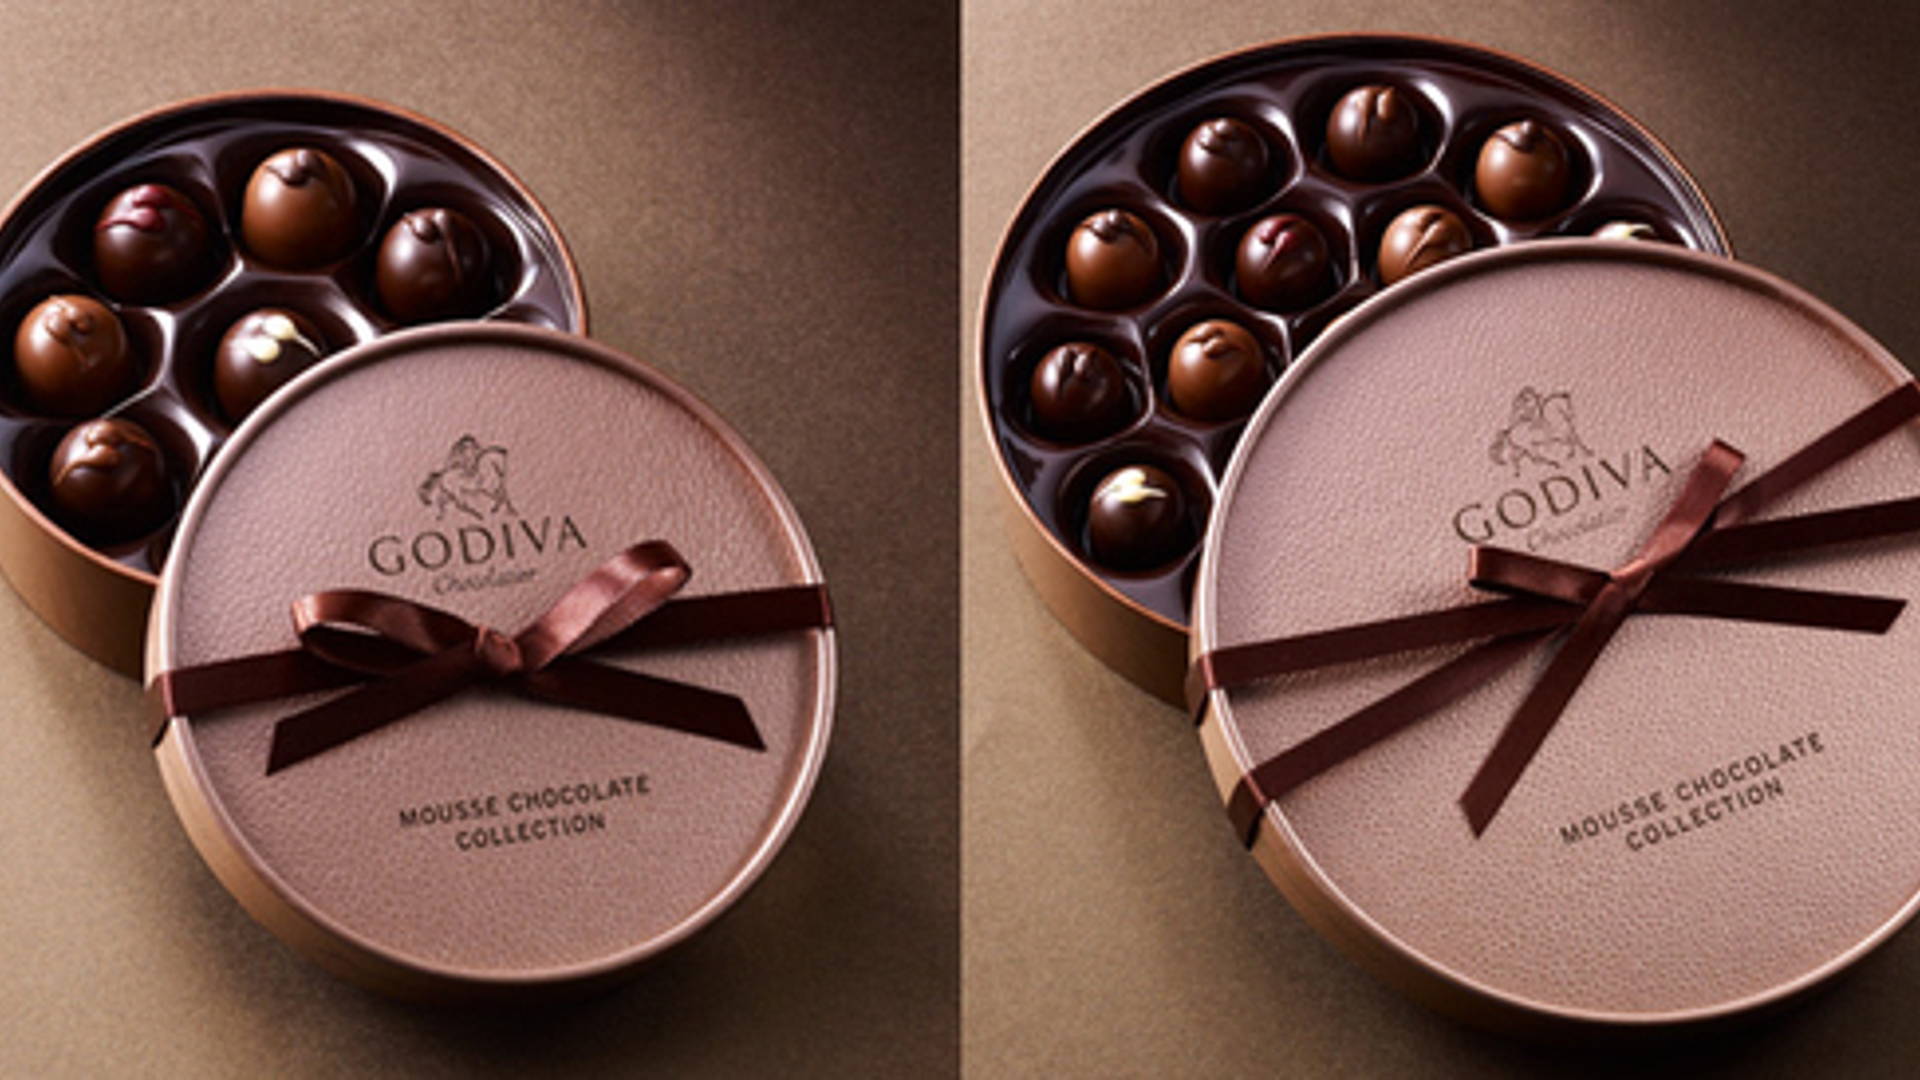 Featured image for Godiva Mousse Chocolate Collection